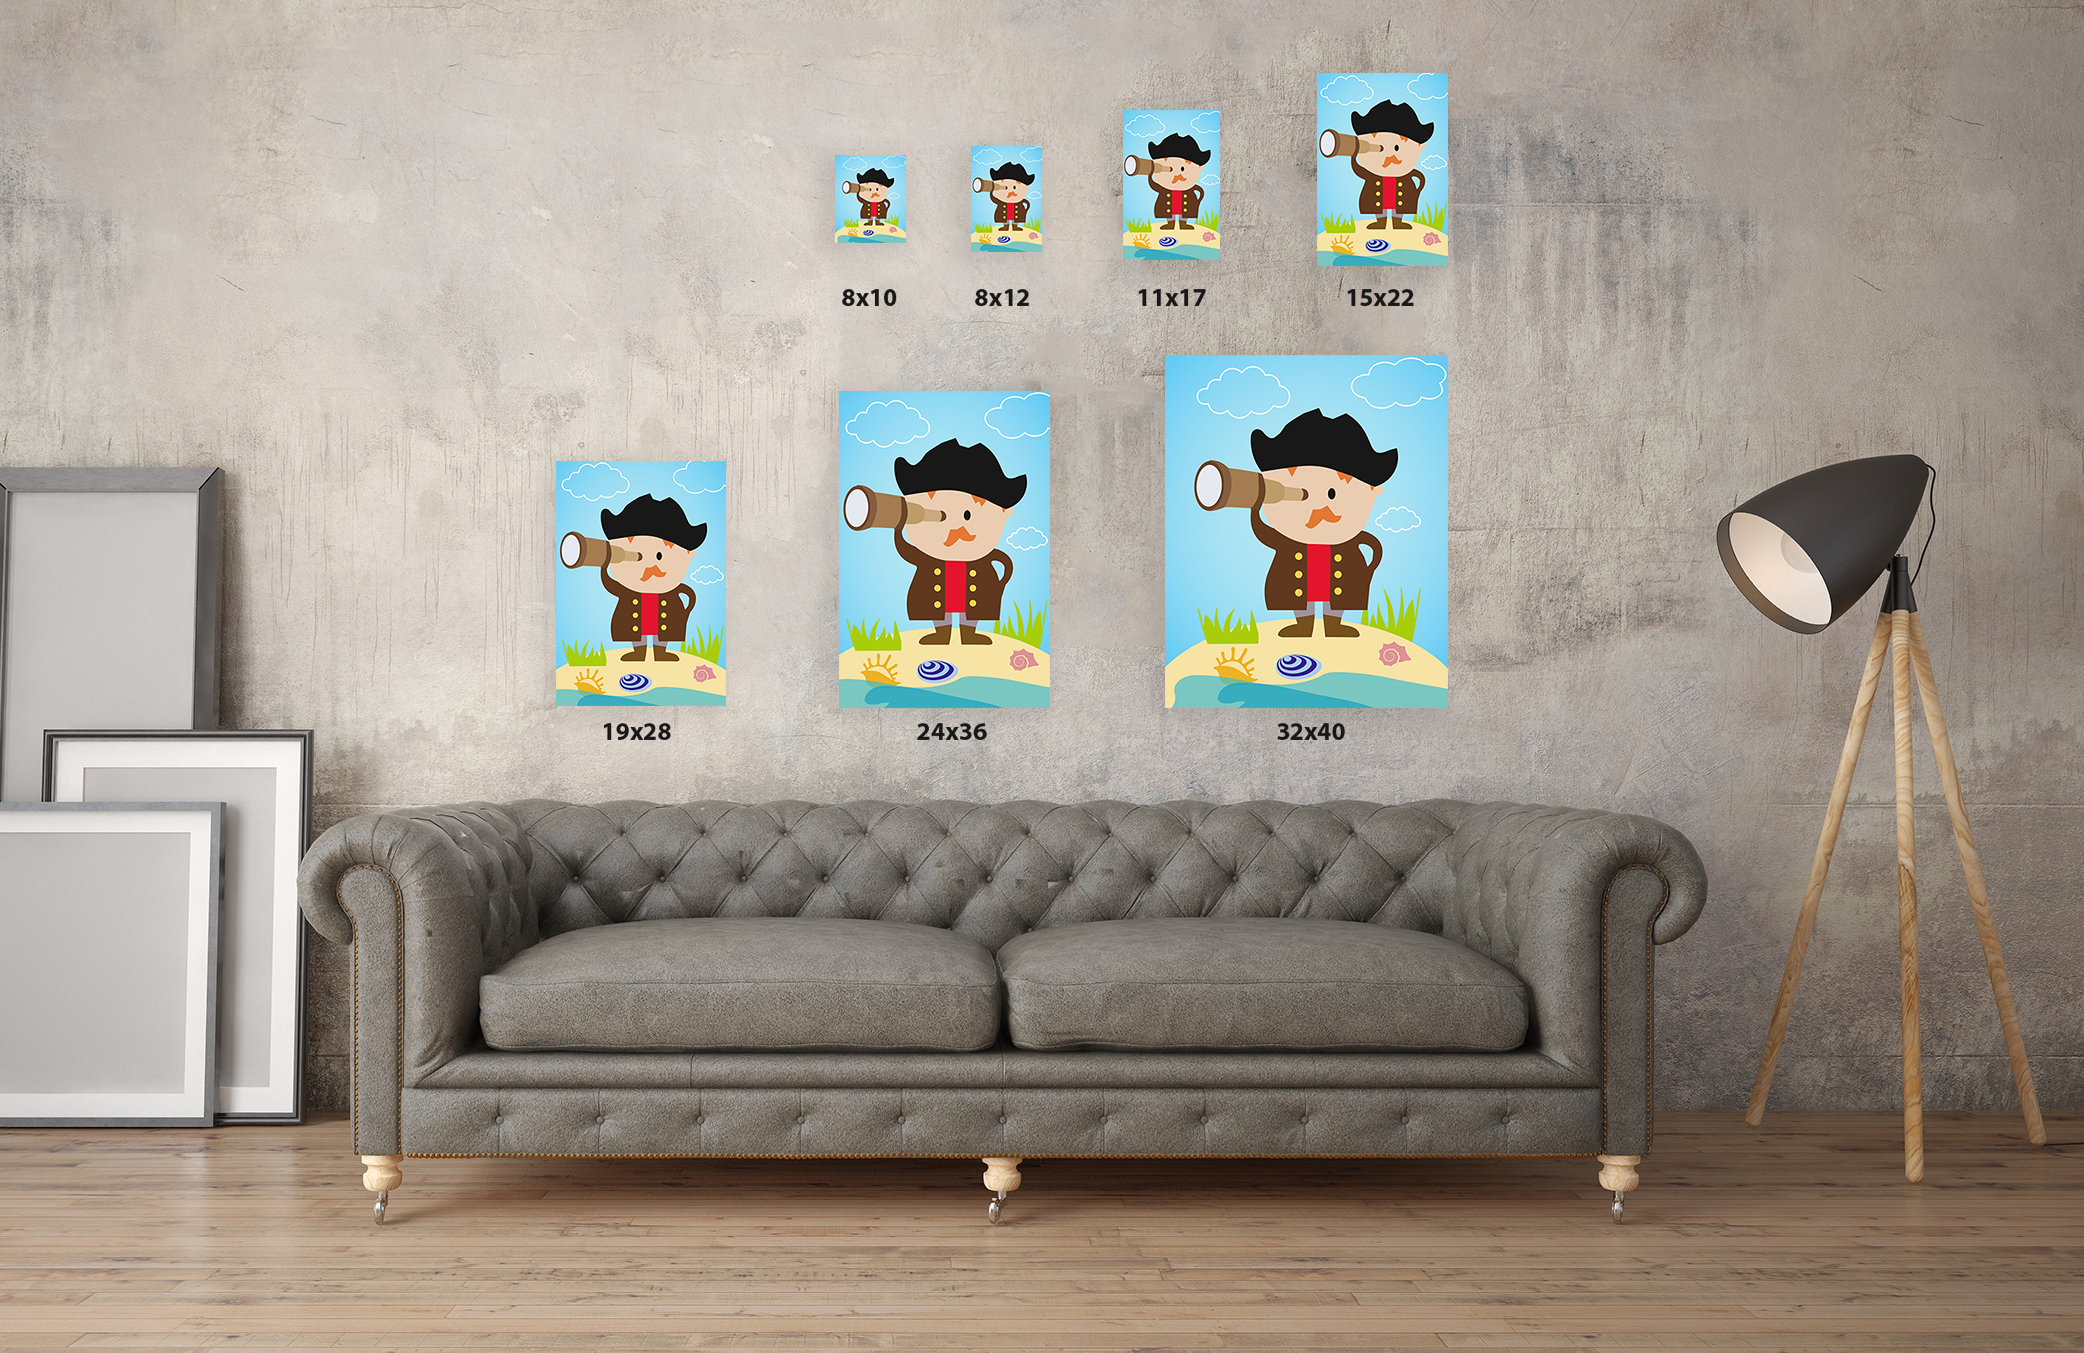 Awkward Styles Marine Picture Kids Play Room Wall Art Cute Pirates Art Newborn Baby Room Wall Decor Pirates Wallpapers Made in USA Little Pirate Picture Pirate Poster Print Kids Room Wall Art - image 3 of 3